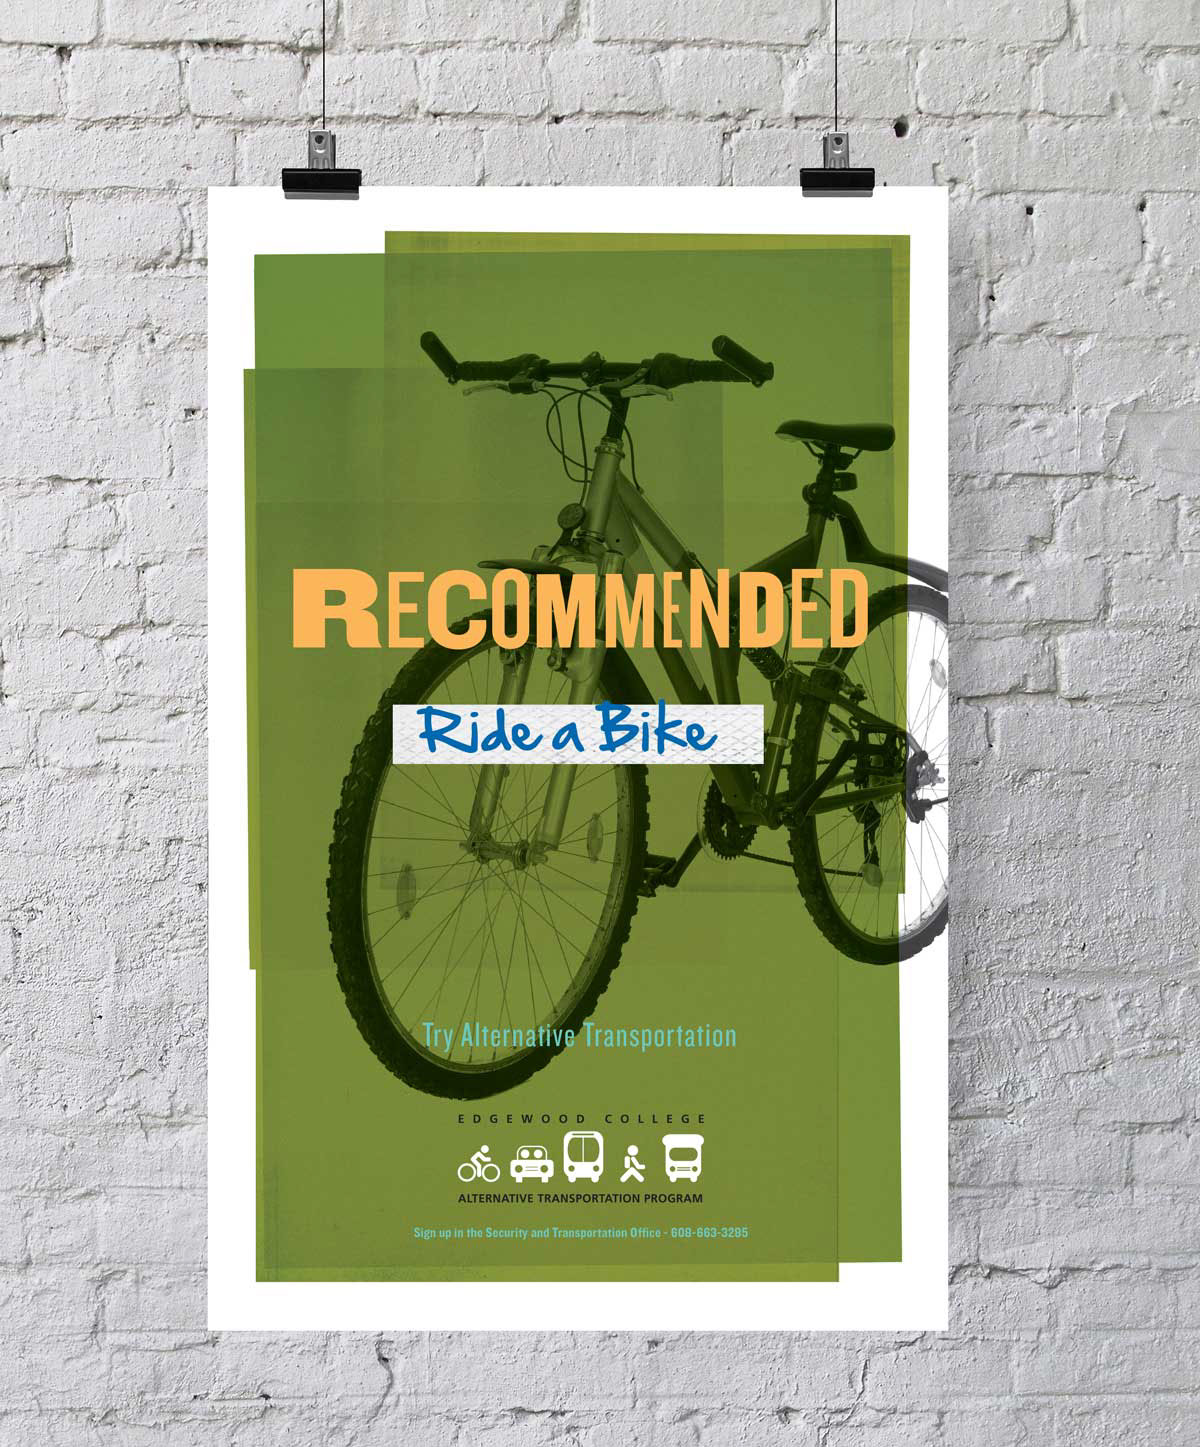 poster college transportation bus Bike shuttle walk facebook banner signs posters banners series Fun